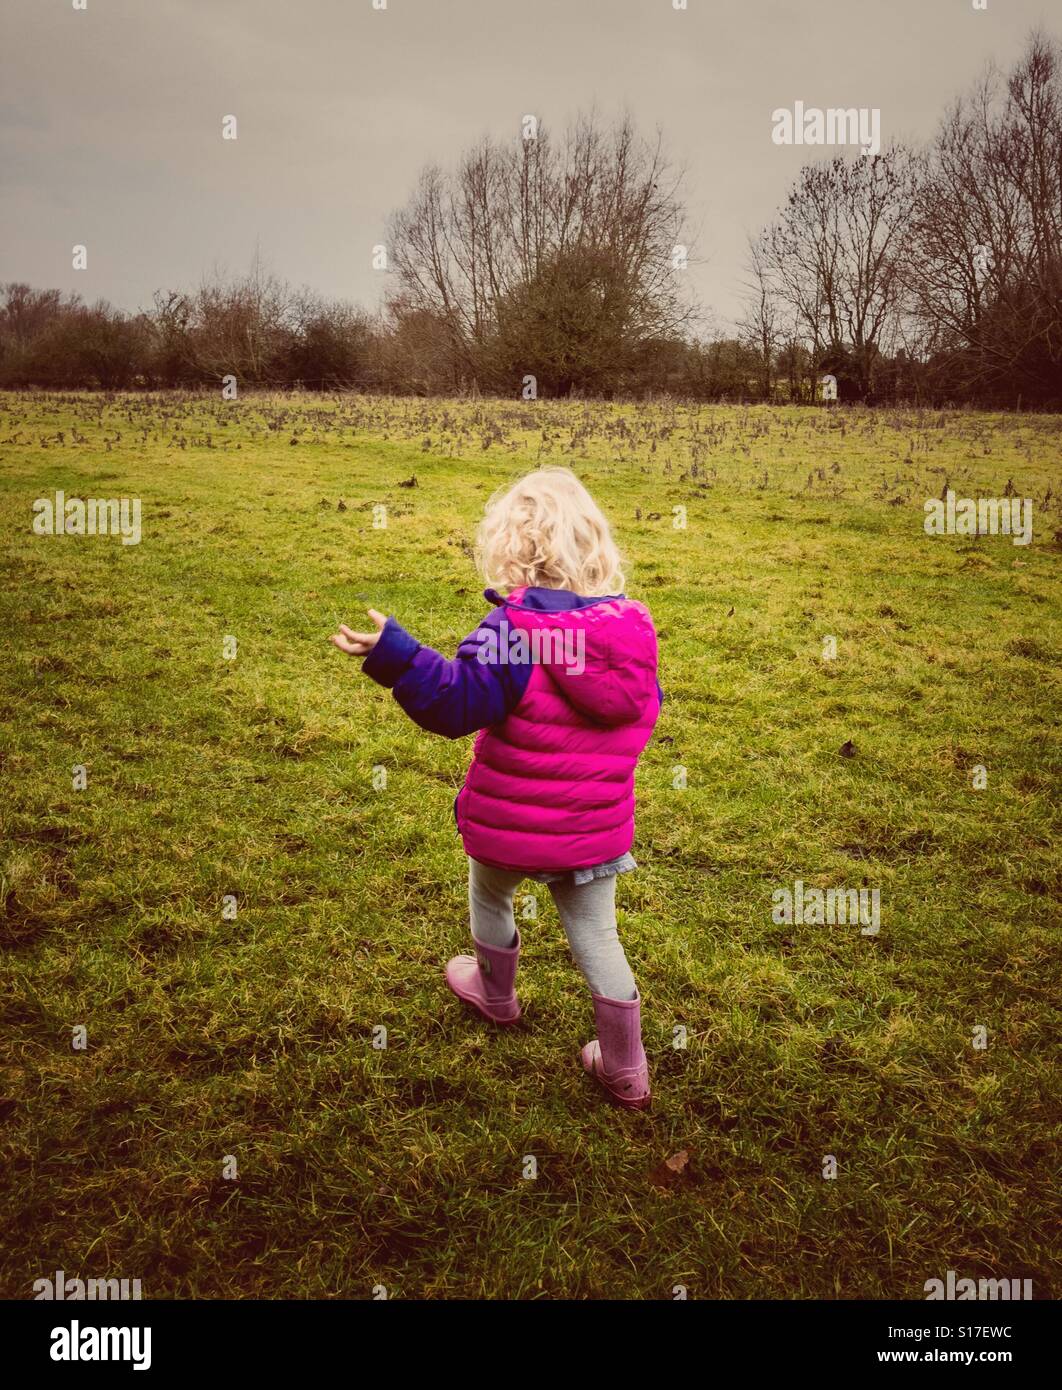 Three year old toddler walking in the countryside Stock Photo